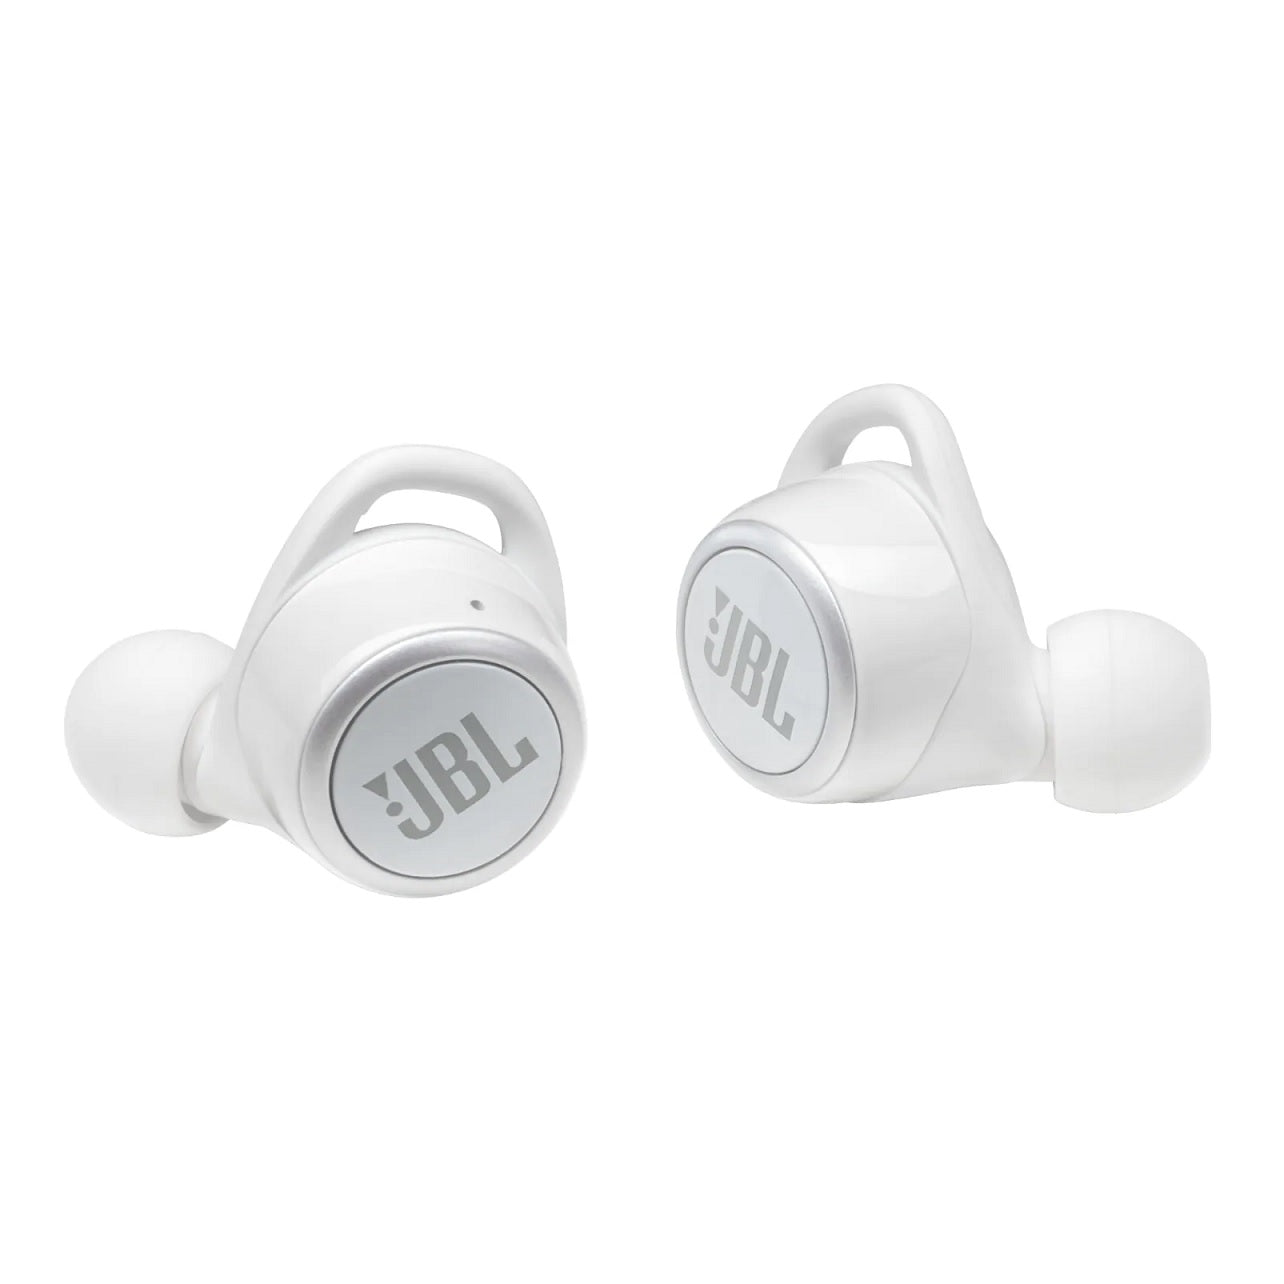 JBL Live 300TWS Truly Wireless In-Ear Headphones with Voice Assistant, White Gloss